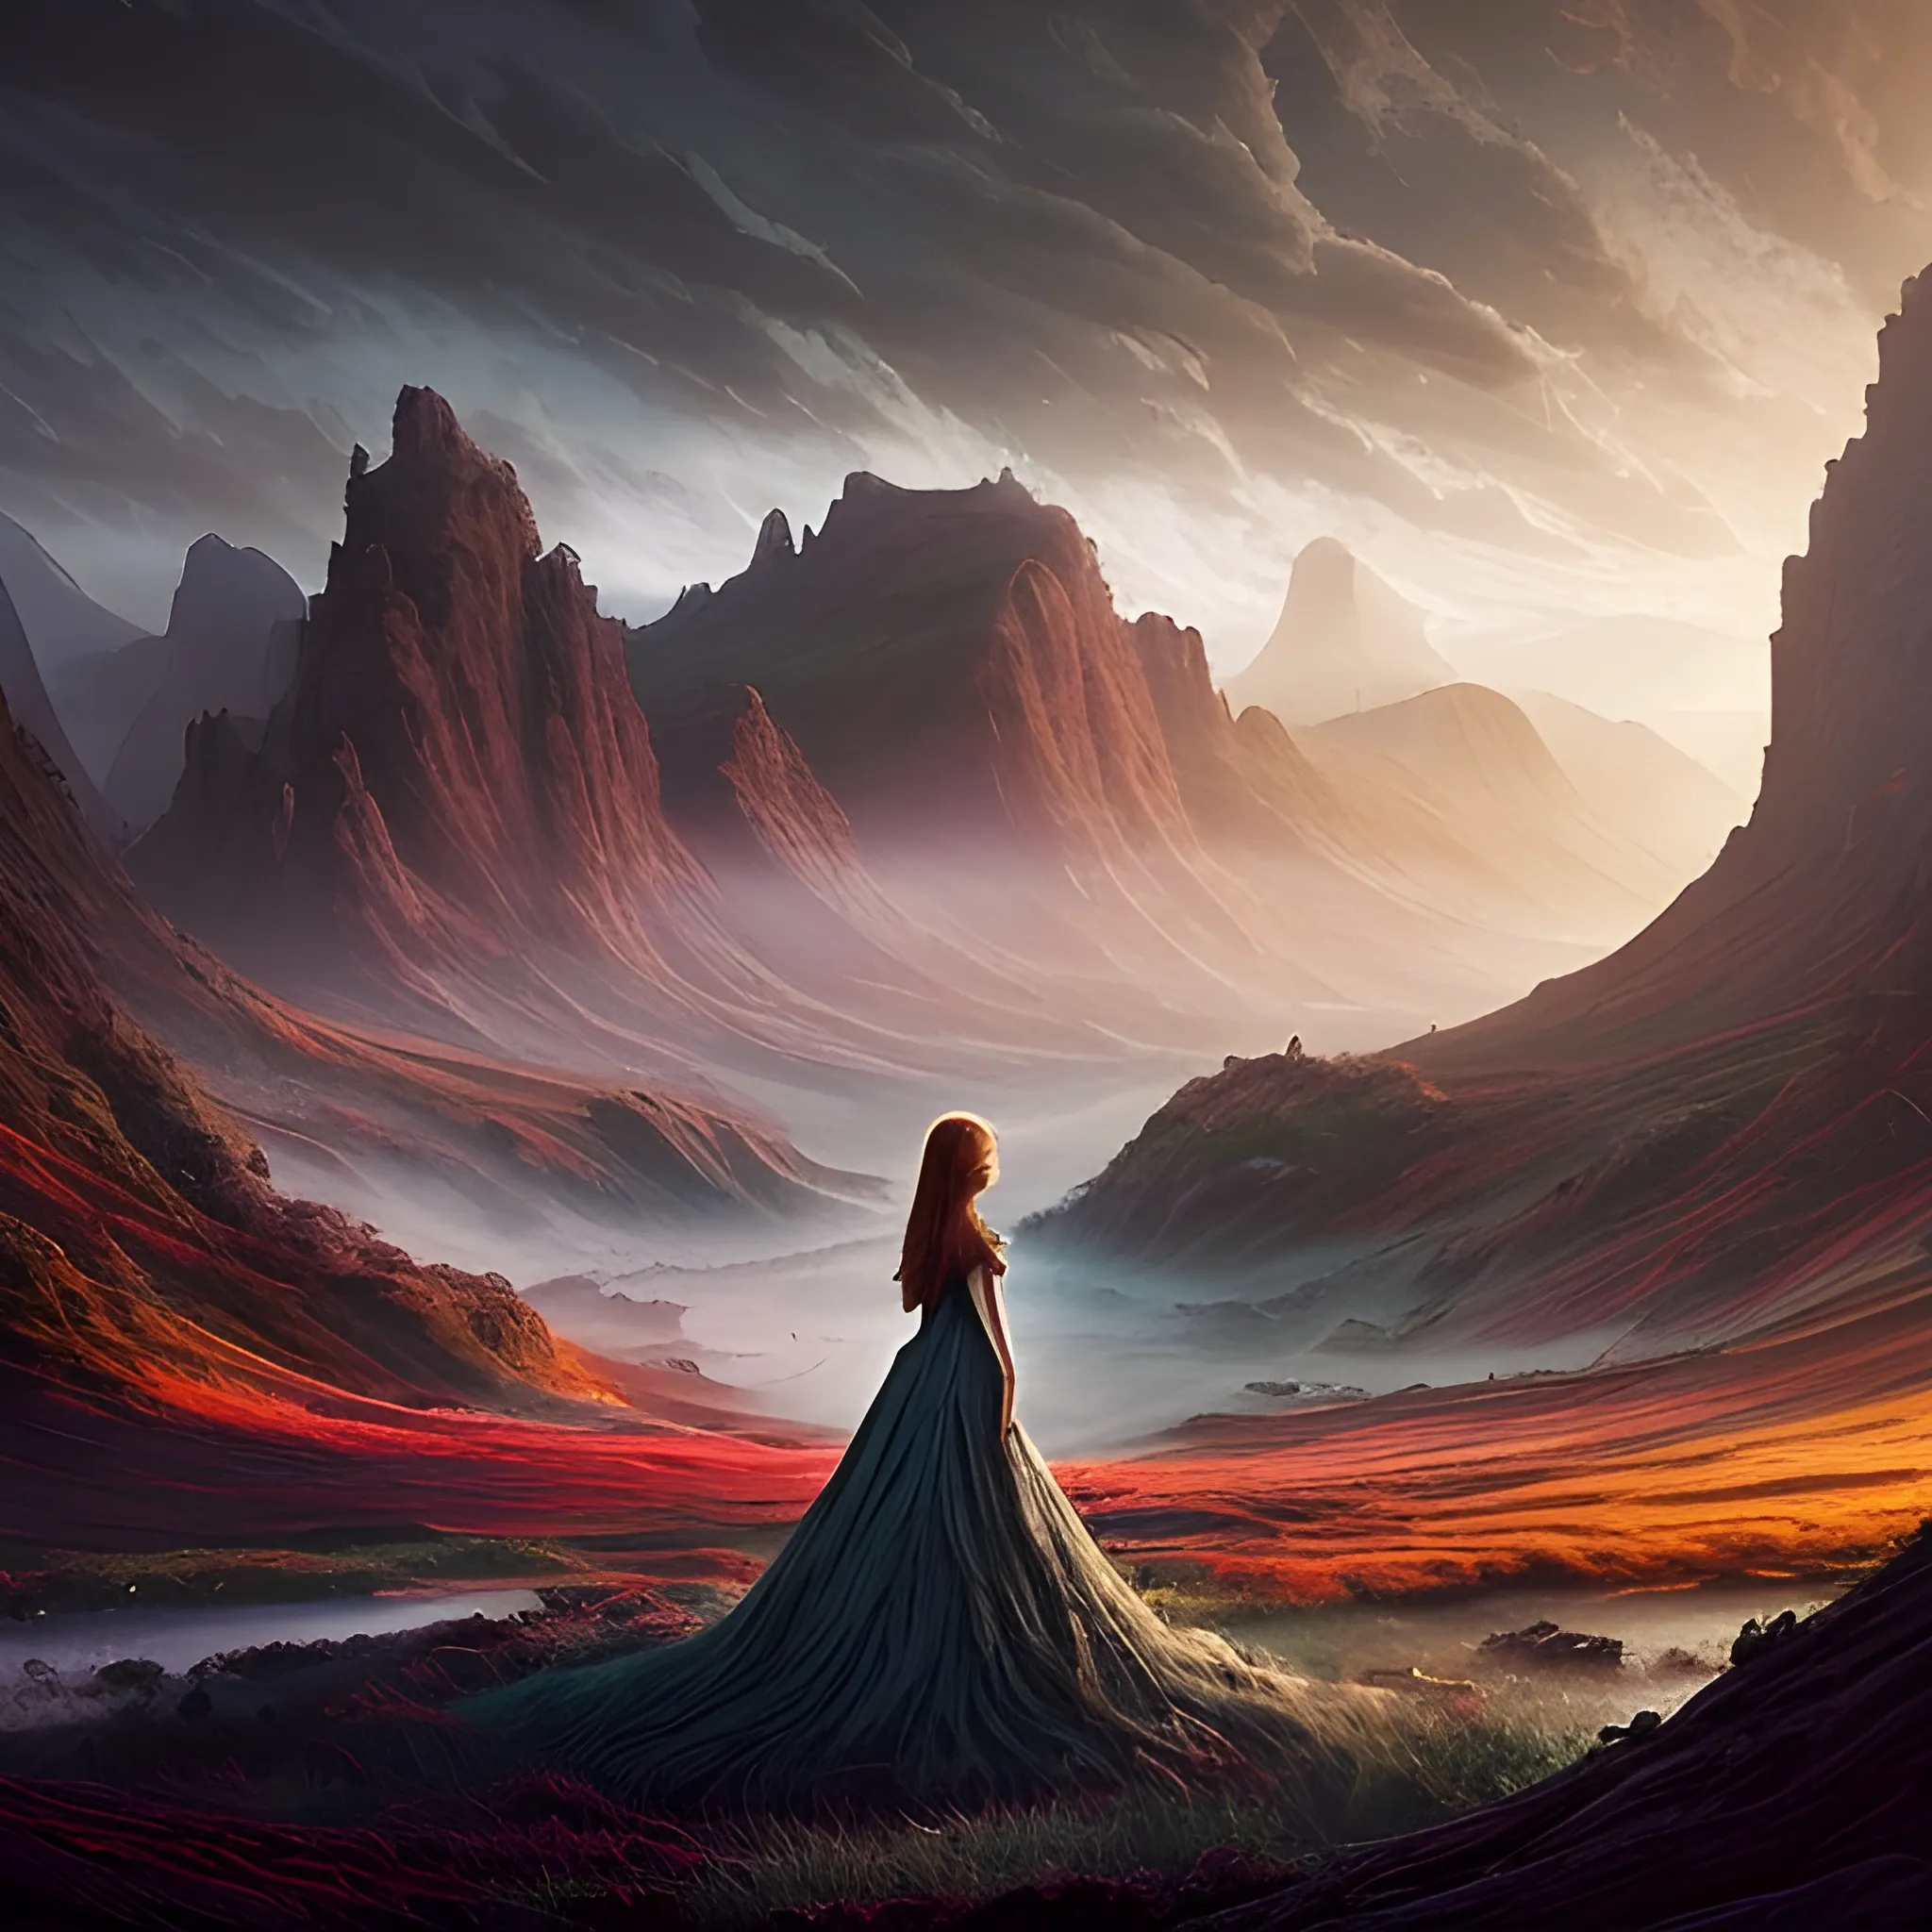 a beautiful landscape photo inspired by arcadia, cinematic atmospheric masterpiece, award winning, hyperdetailed, fantastic, wonderful with a mid-aged modern looking woman with mid-long hair looking at this scenary knowing that the future is in her hands.

